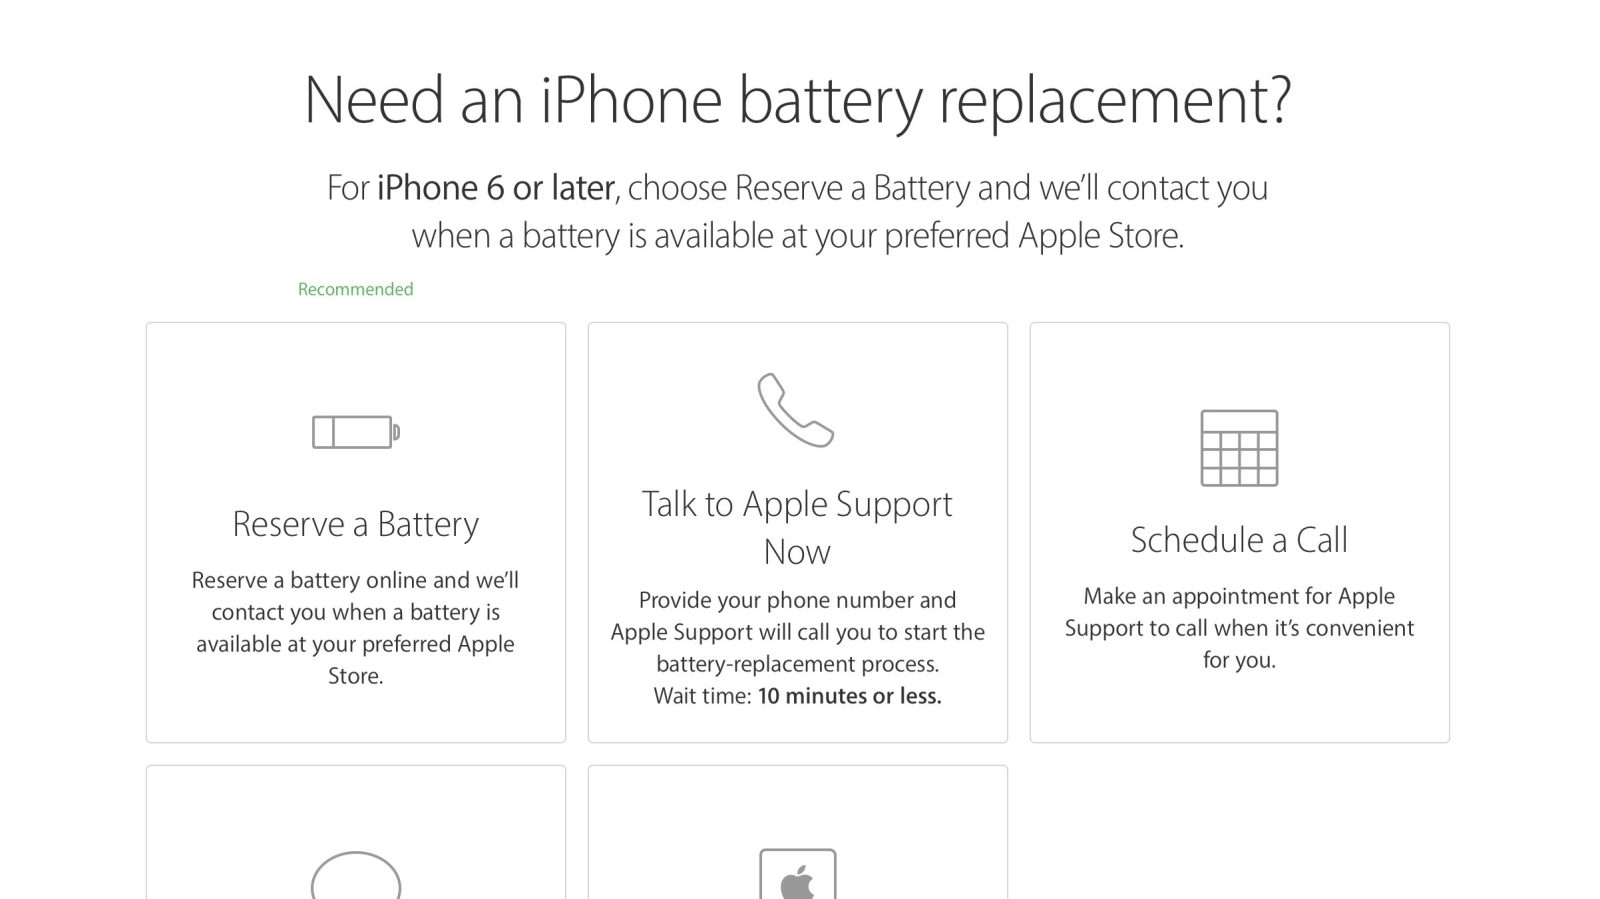 apple offers online battery reservations in canada, recommends